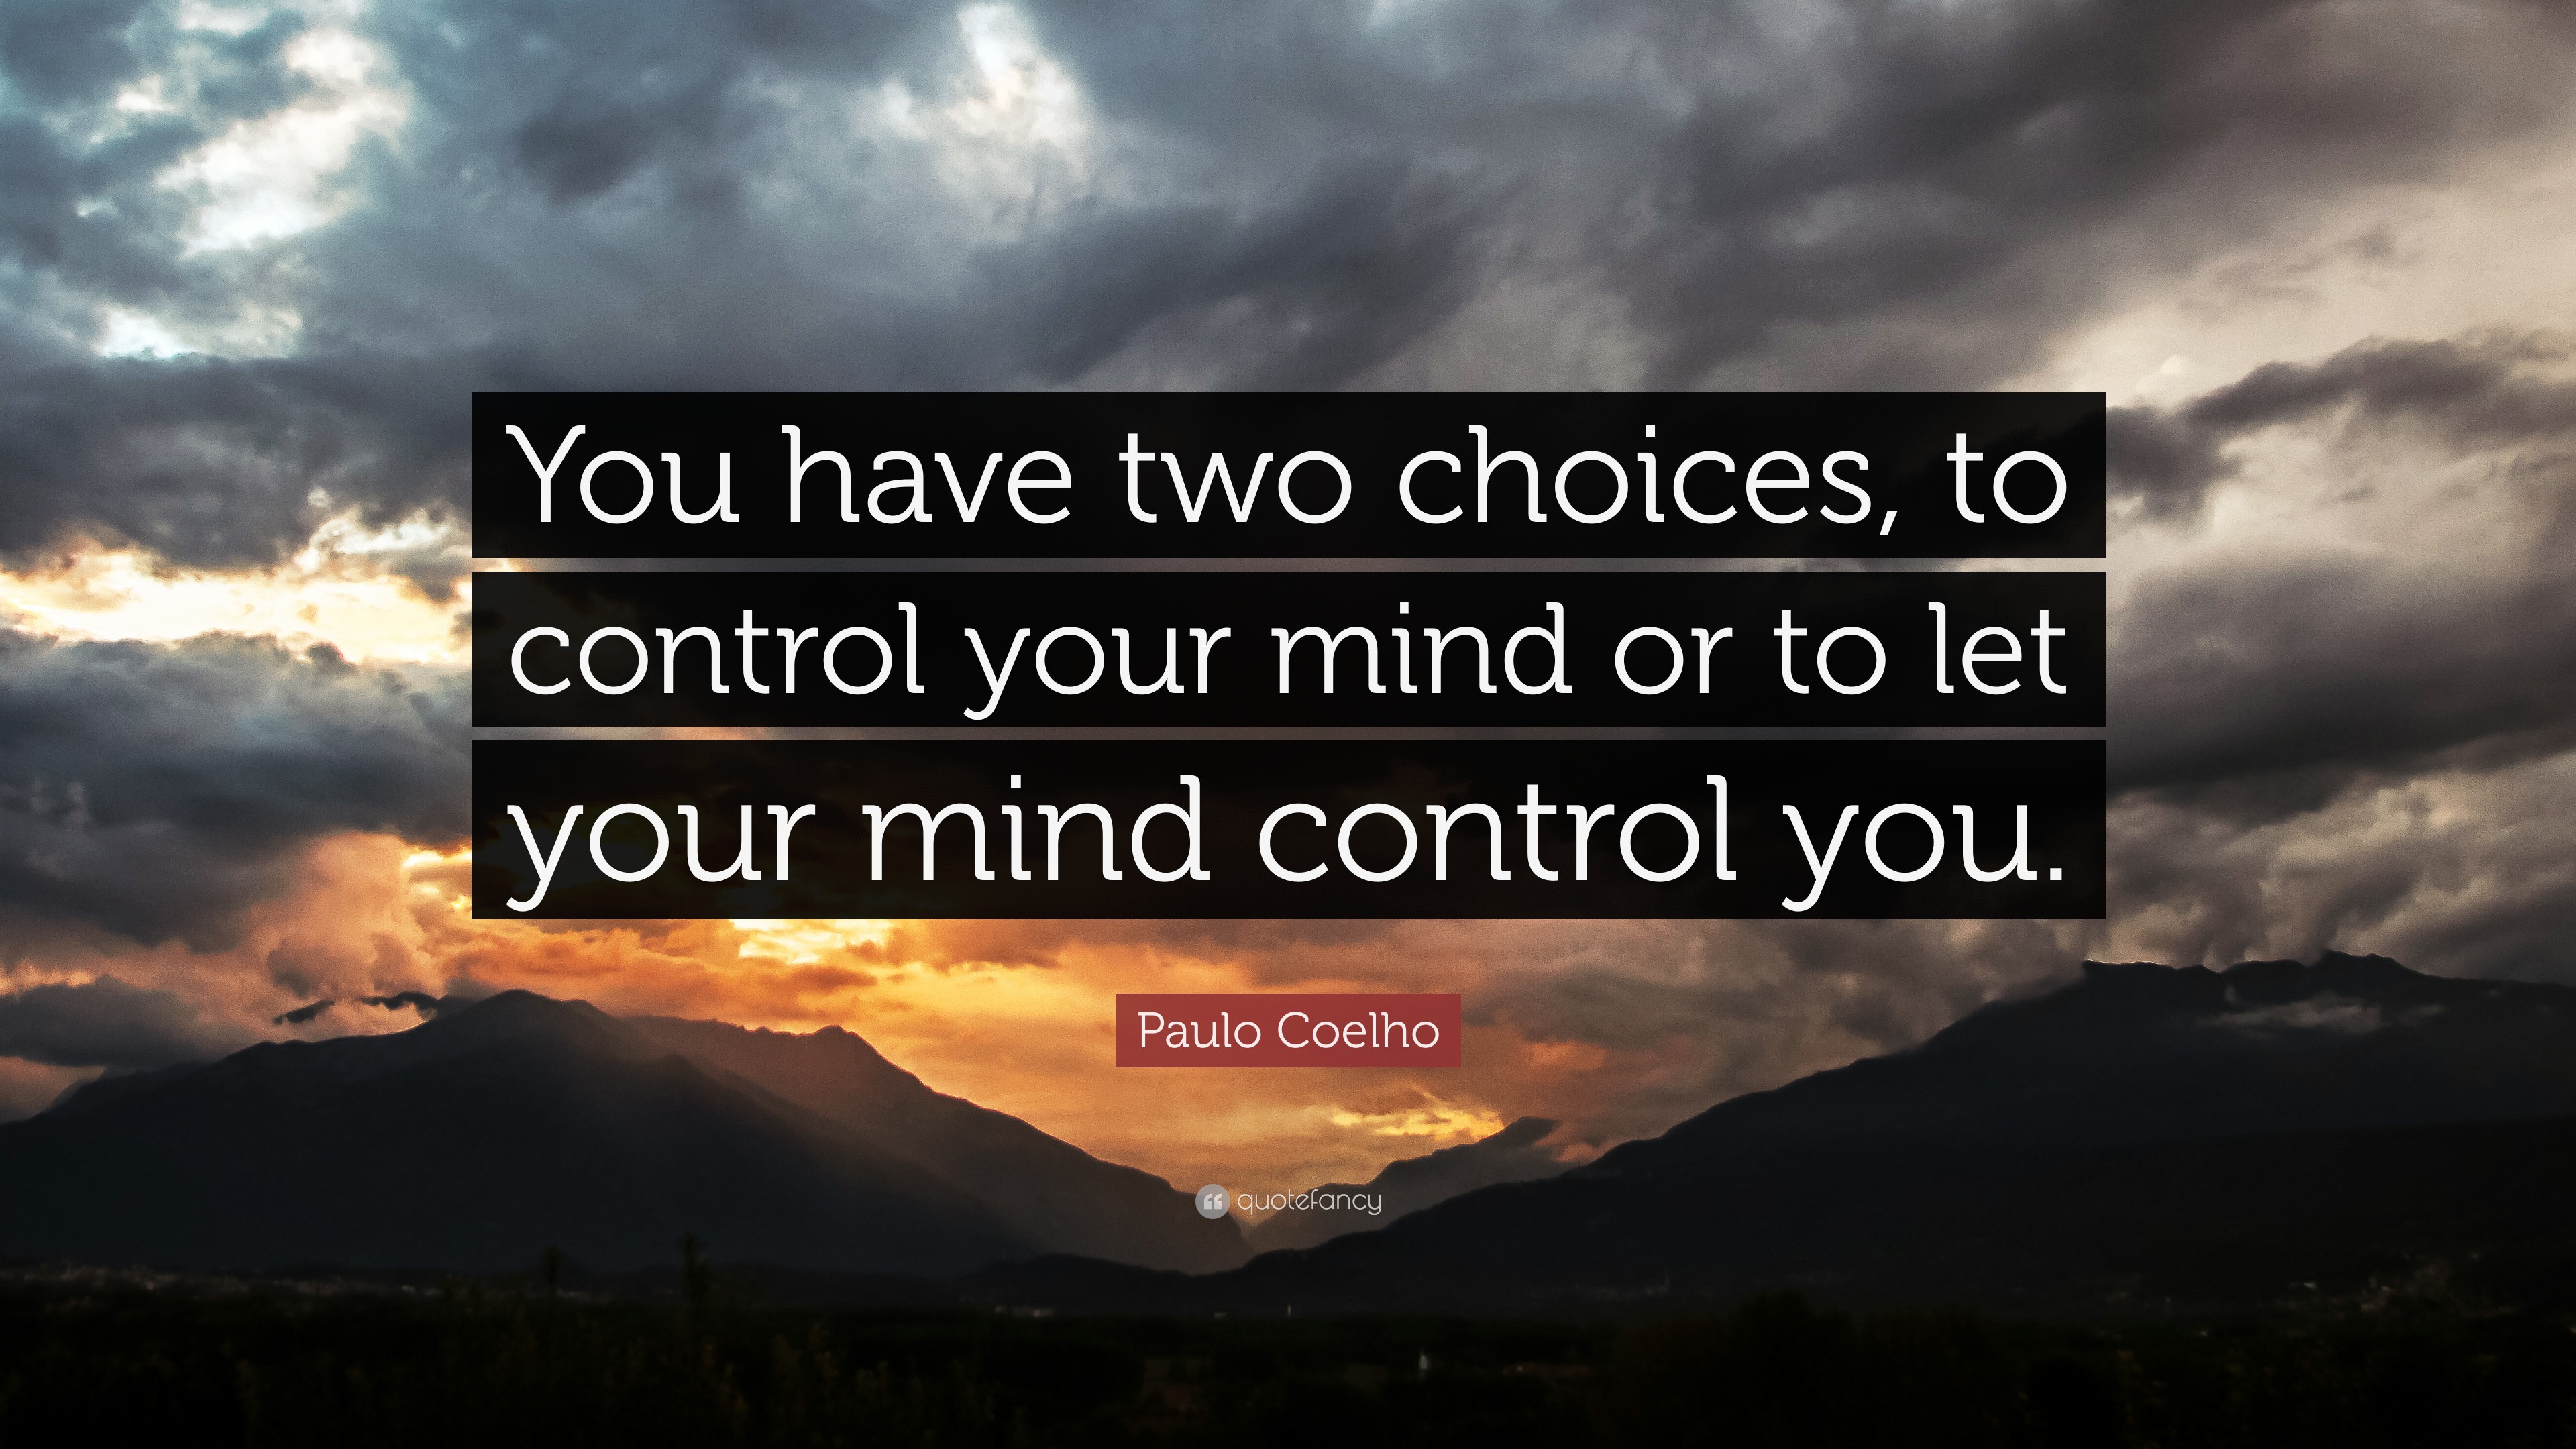 Paulo Coelho Quote  You have two choices to control your  